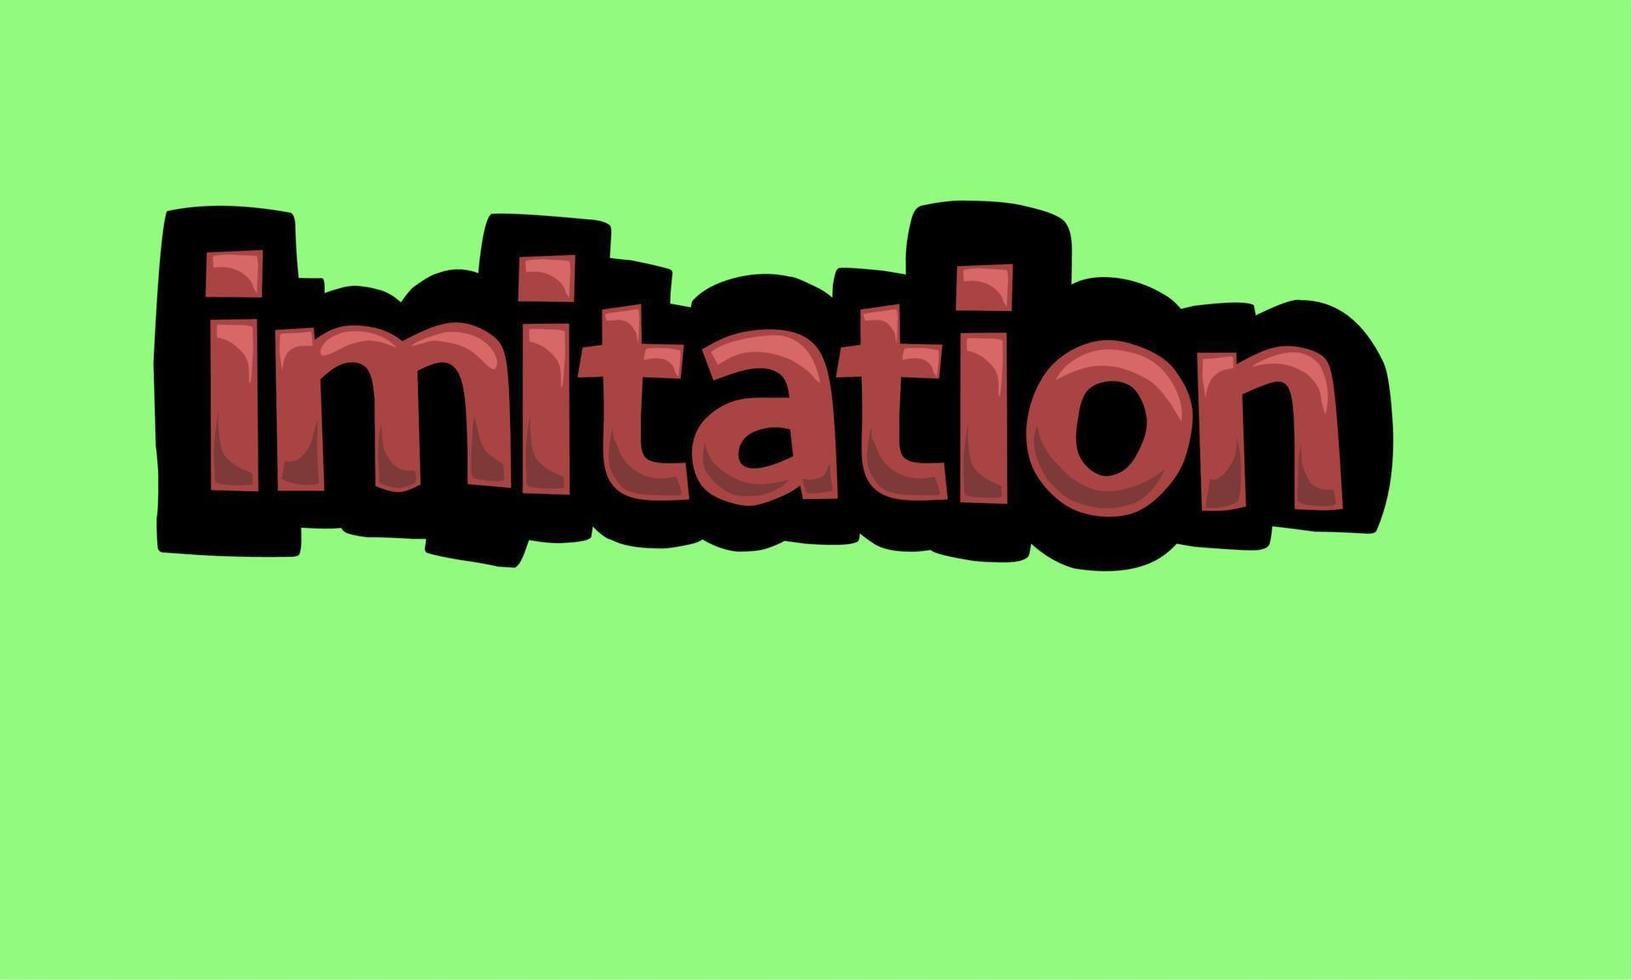 IMITATION writing vector design on a green background